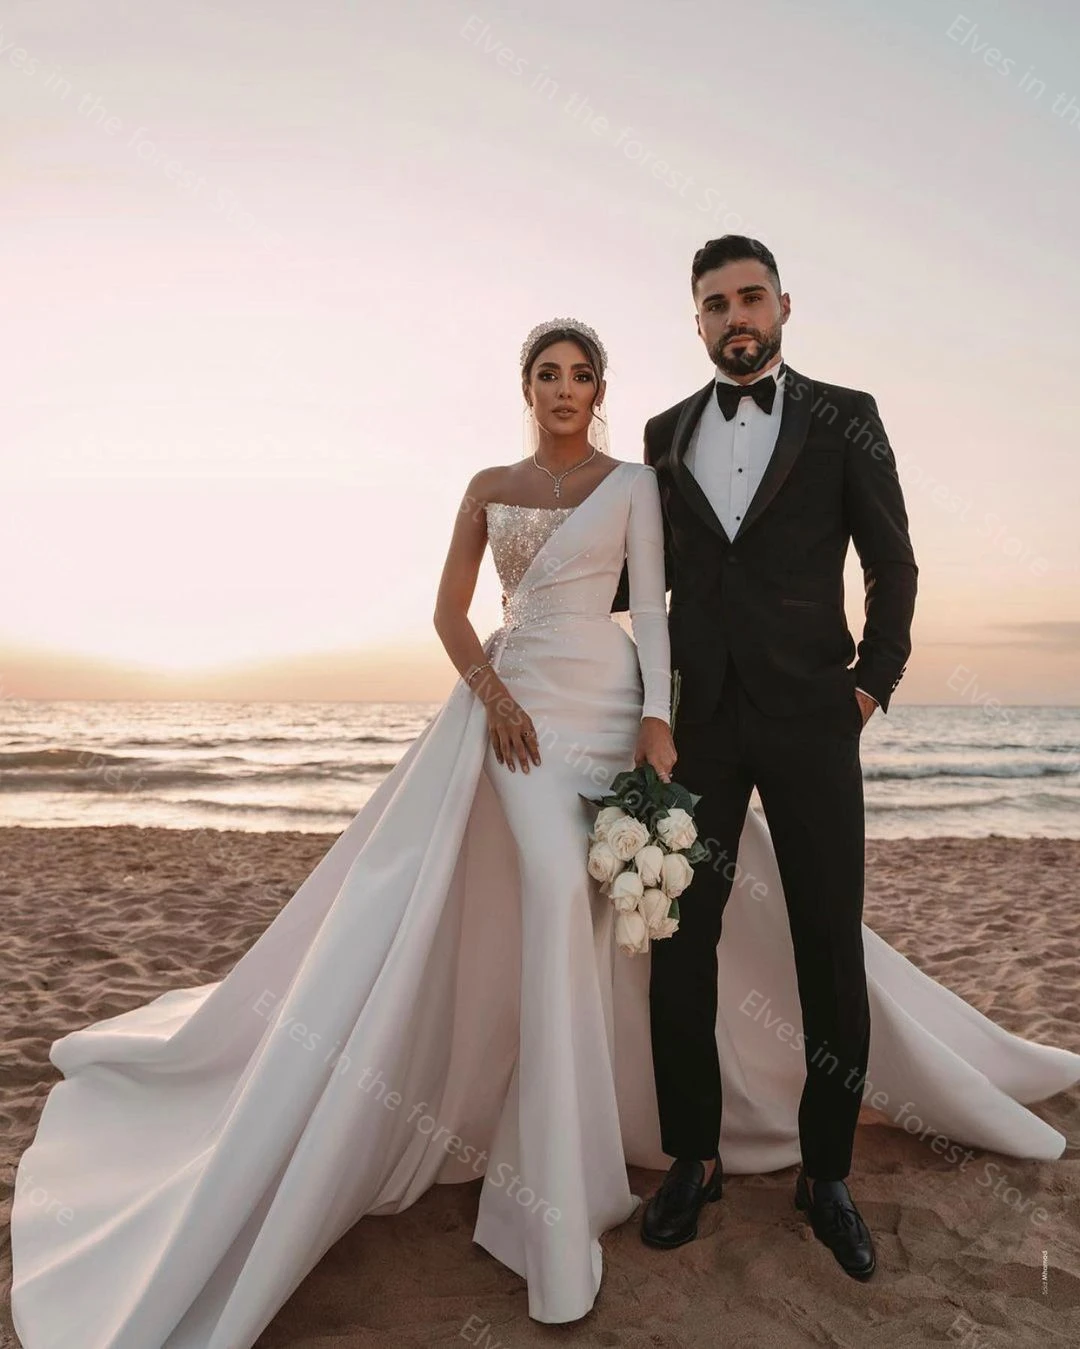 

New Fashion Women Suits Wedding Dresses One Shoulder Long Sleeves Beaded With Overlay Train Dubai Arabic Bridal Wedding Gowns